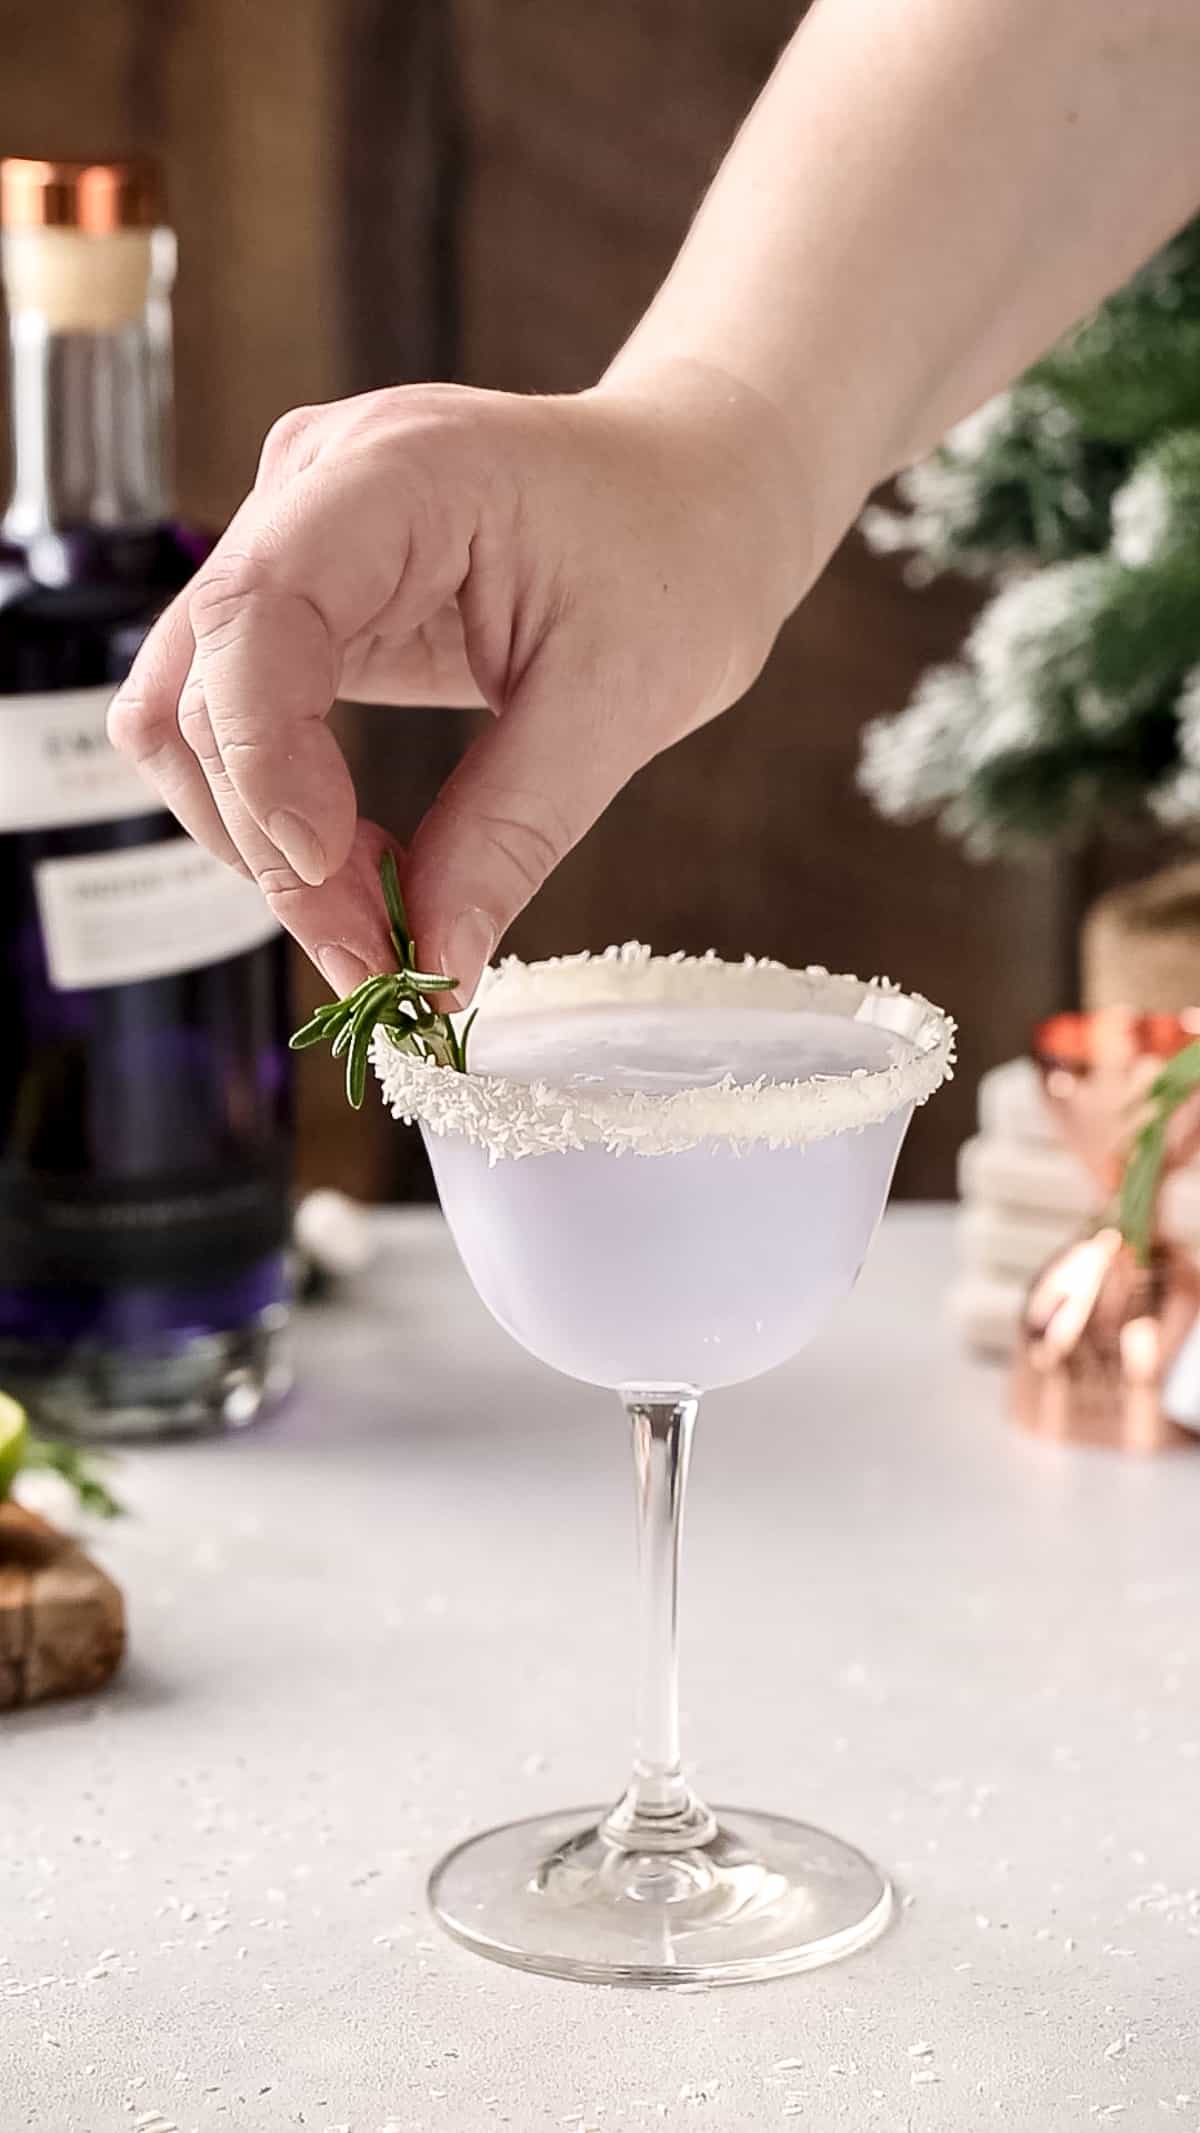 Hand adding a rosemary sprig to a purple cocktail in a coupe glass with a coconut rim.